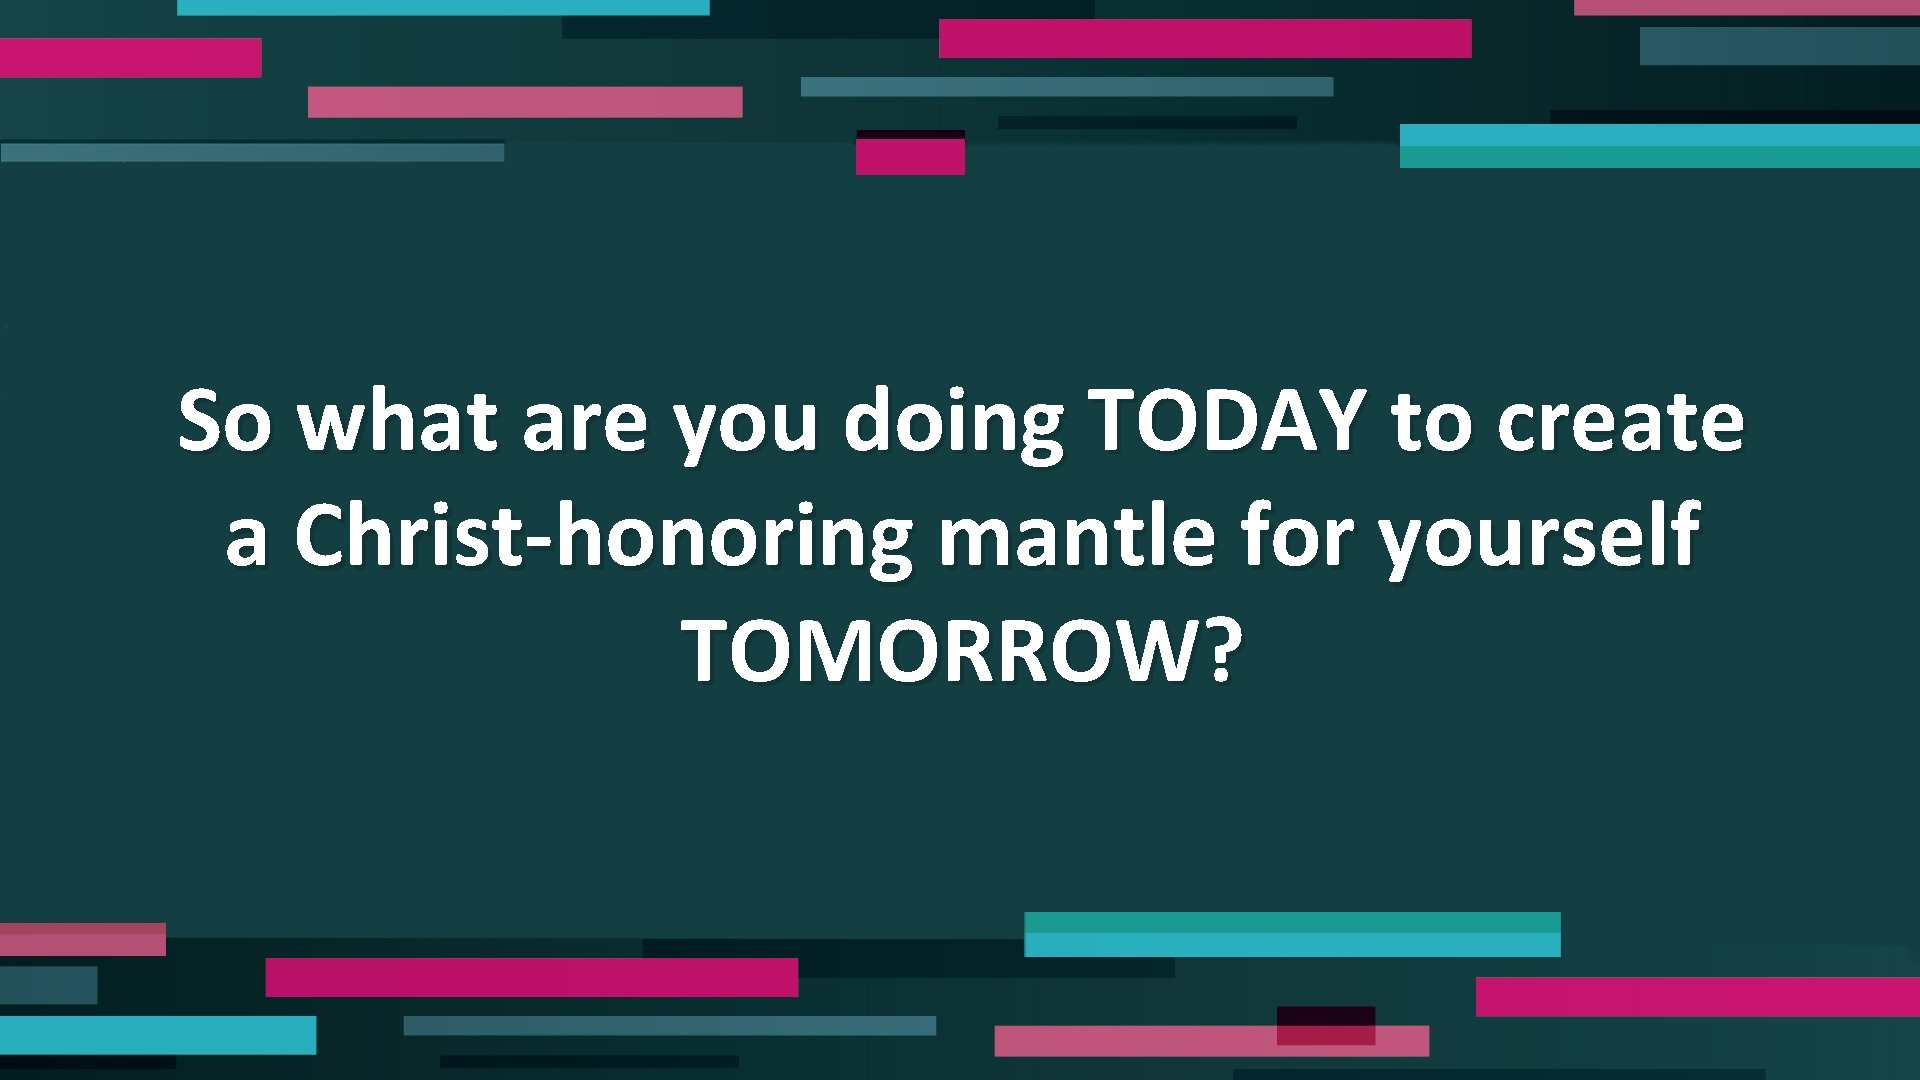 So what are you doing TODAY to create a Christ-honoring mantle for yourself TOMORROW?